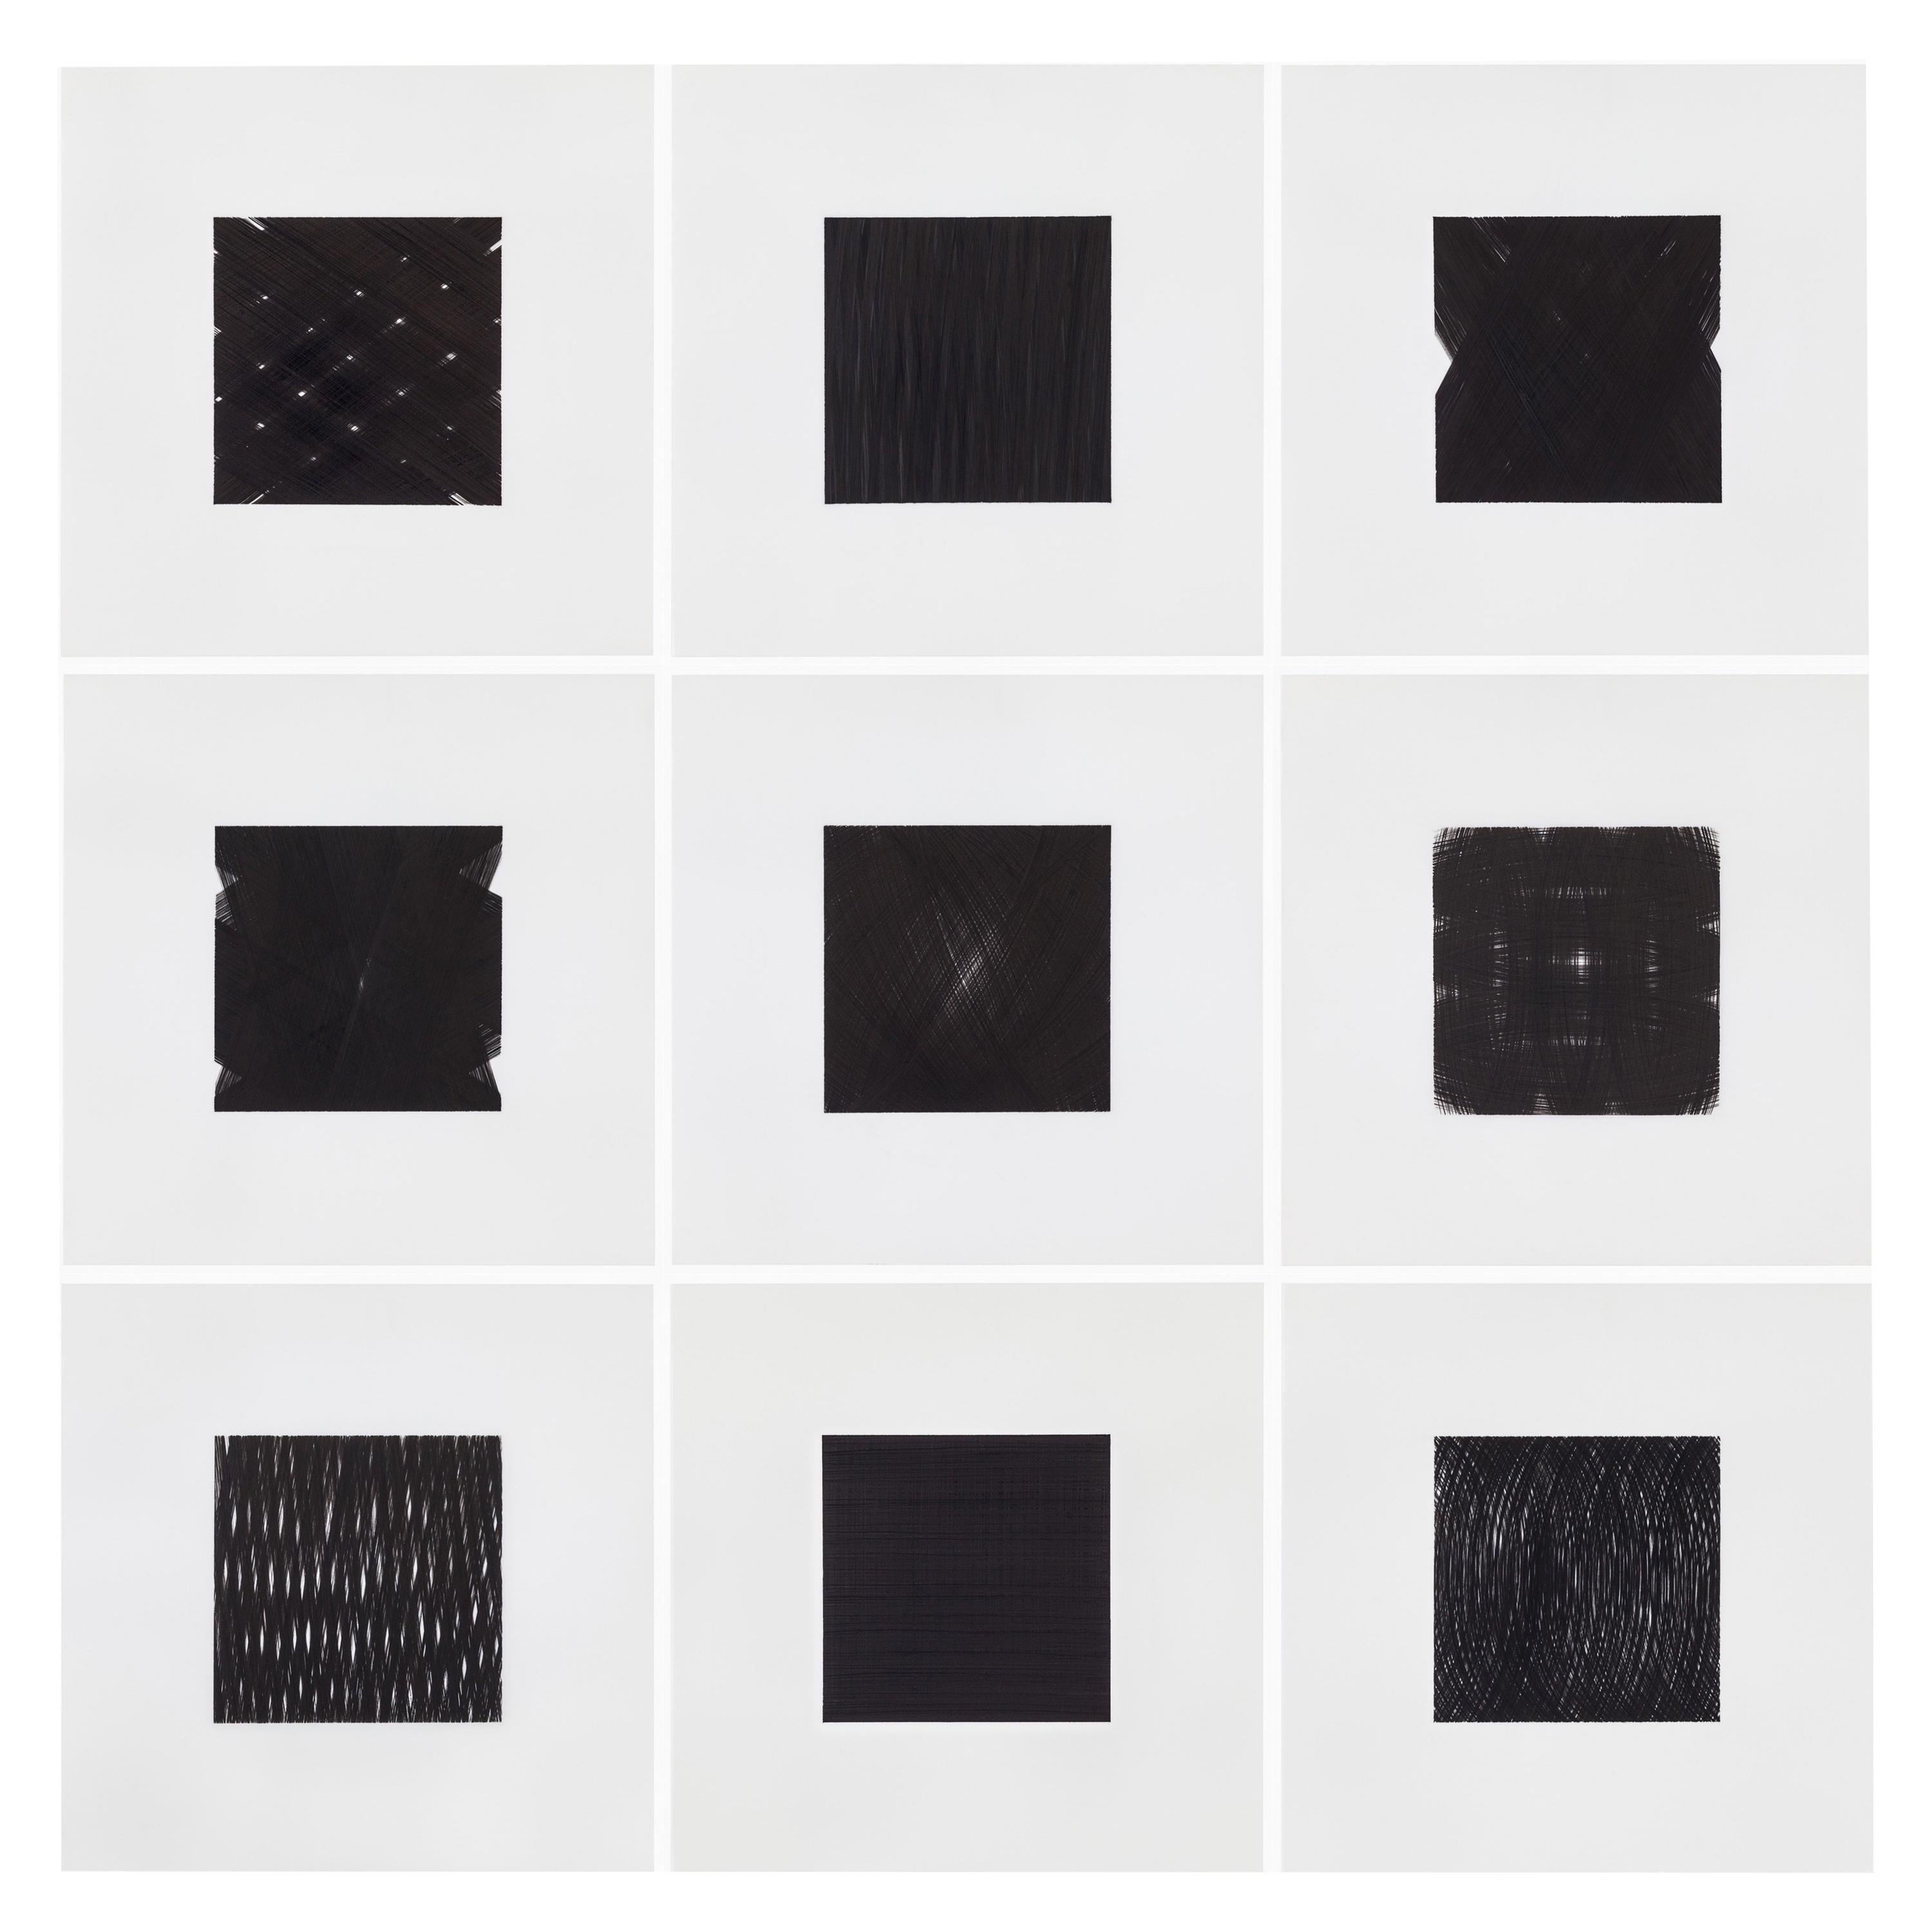 Patrick Carrara Black Ink on Mylar Drawings, Appearance Series, 2013 - 2015 For Sale